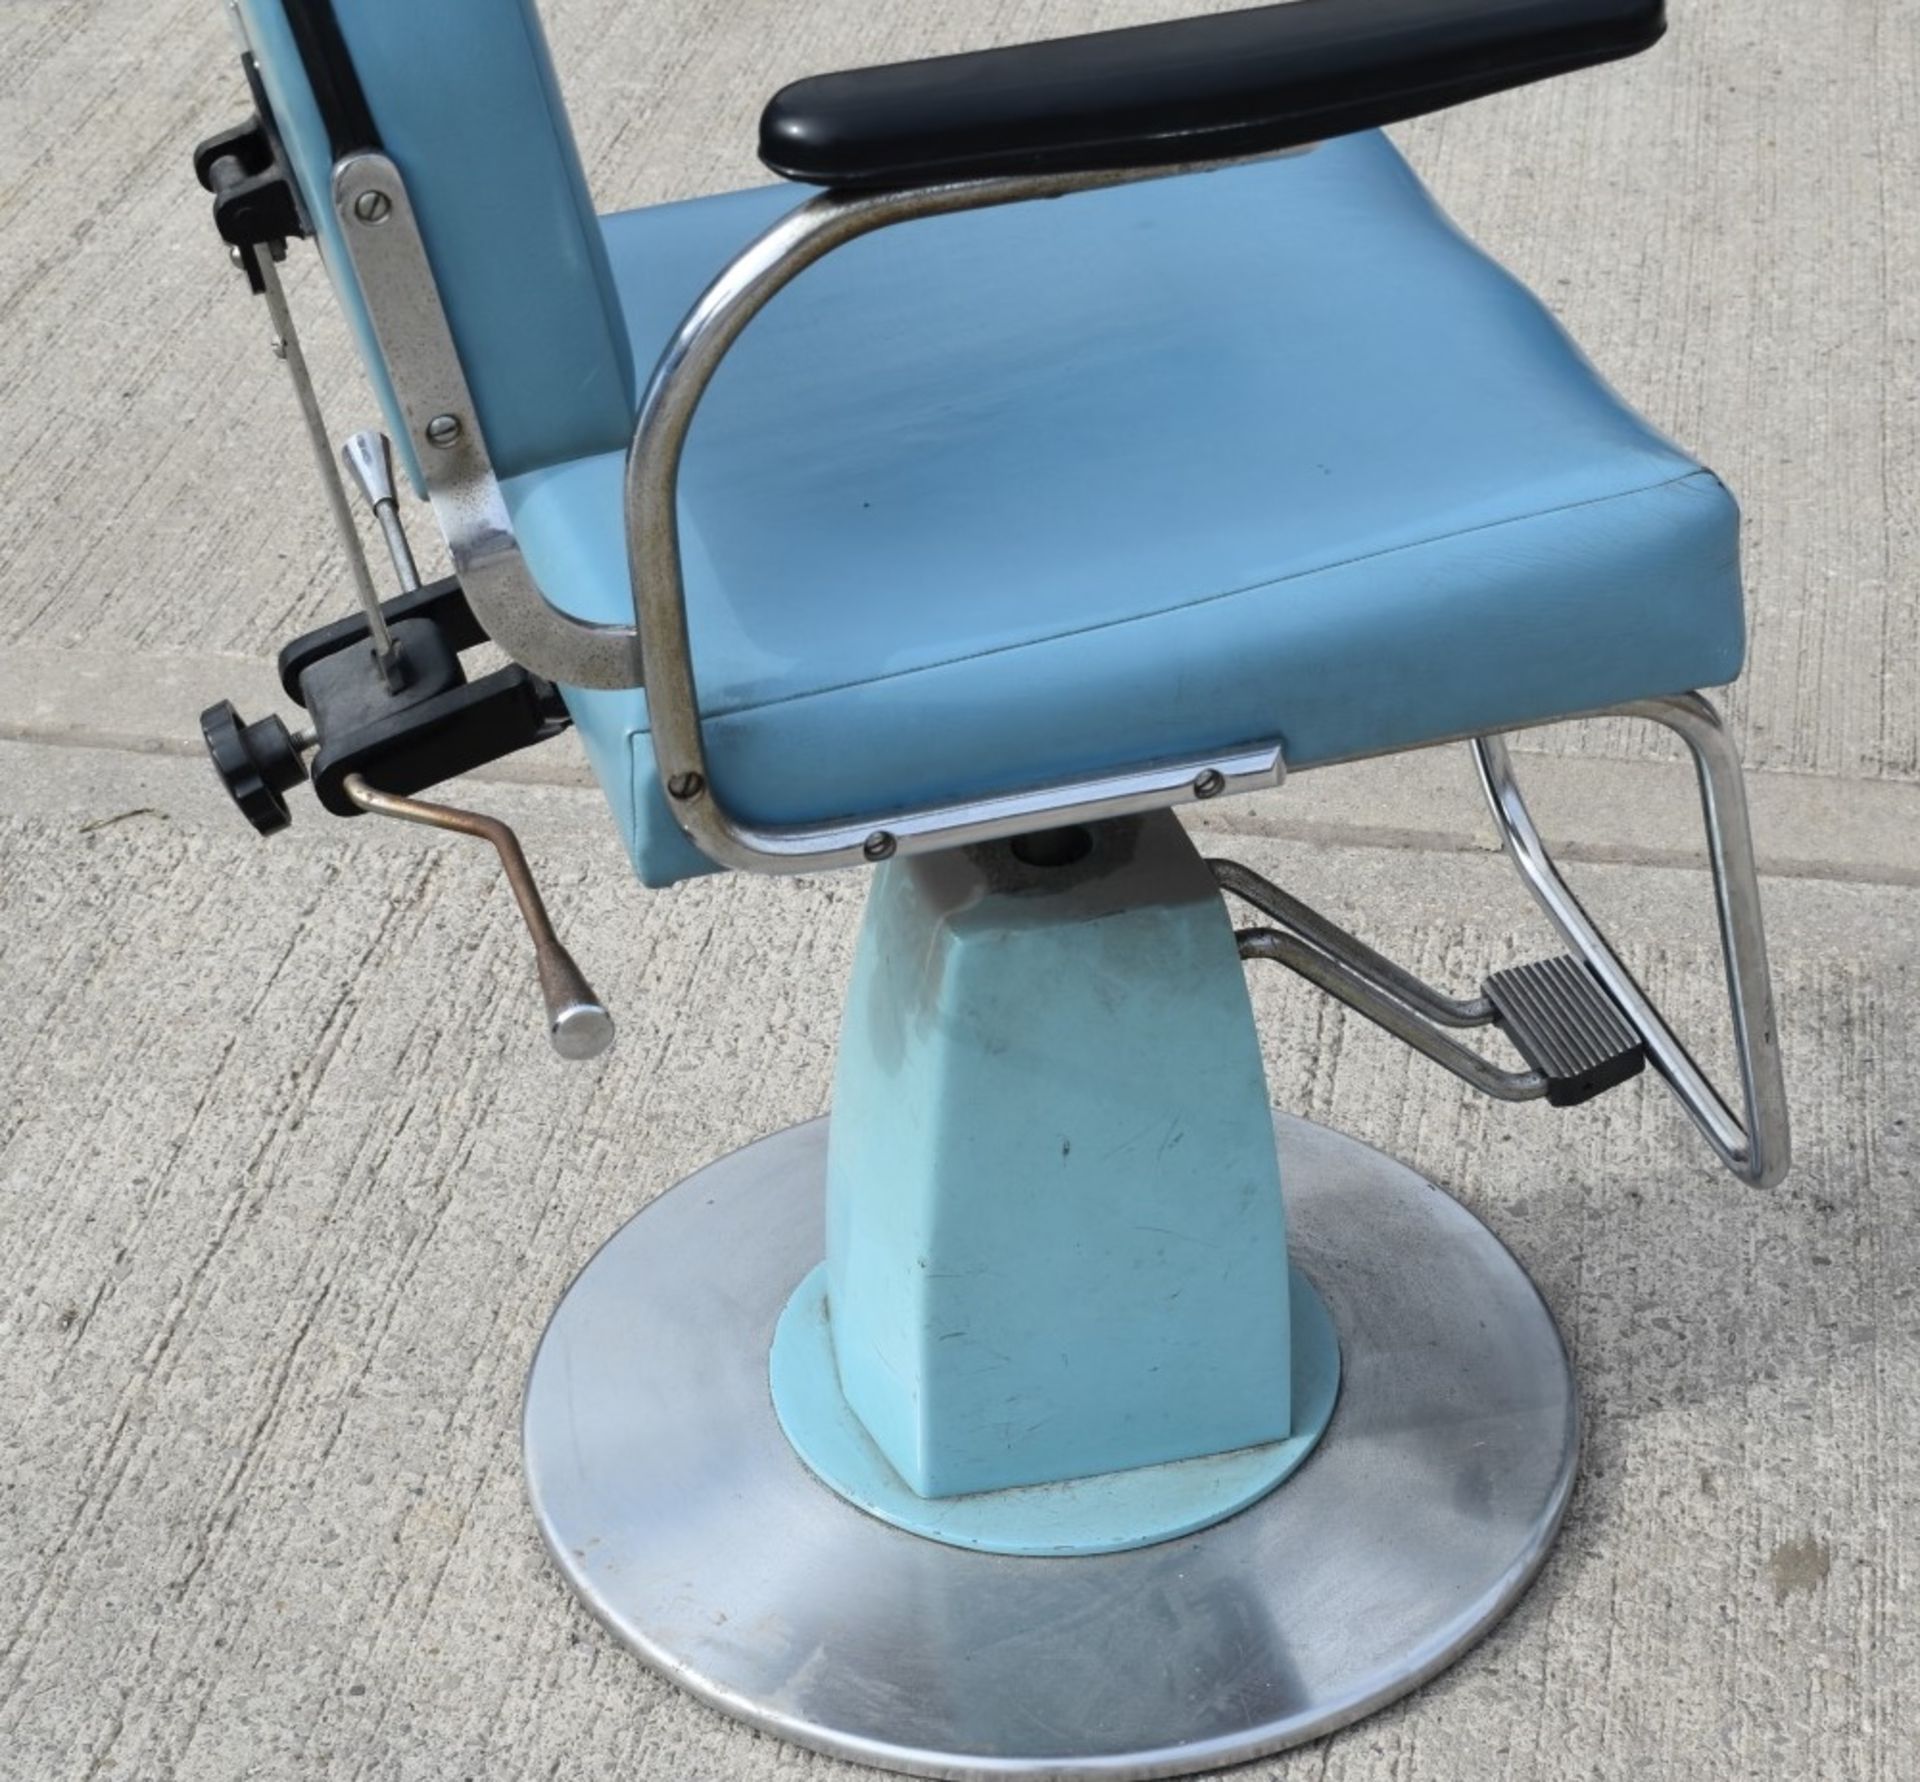 1 x Vintage F&F Koenigkramer Examination Chair With Gas Lift and Headrest - Removed From a Central - Image 12 of 12